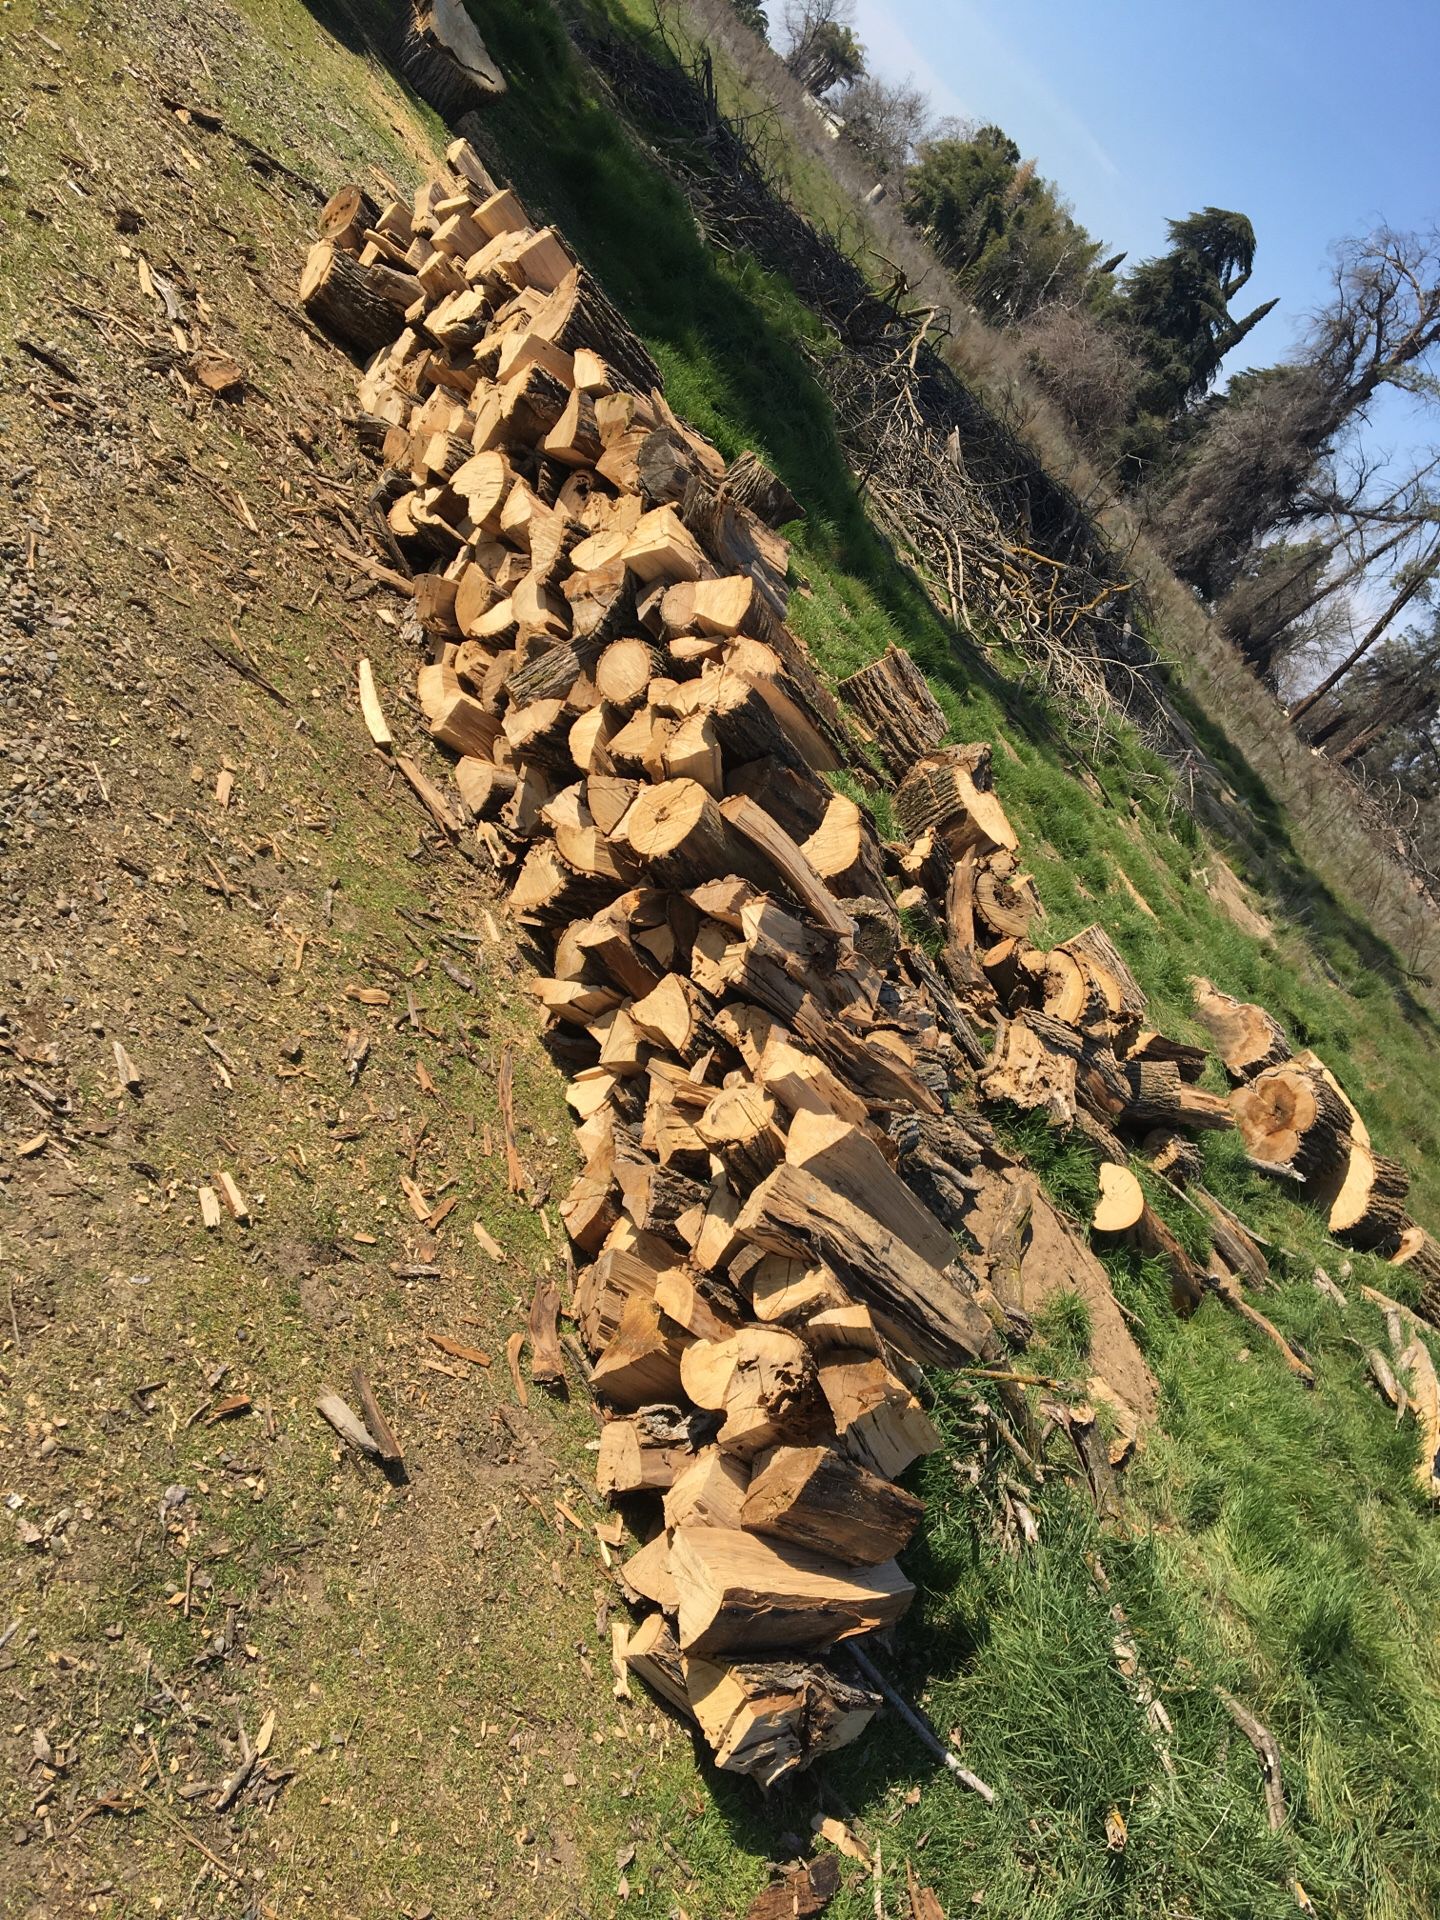 Seasoned firewood for sale come pick up $50 I’ll deliver for another $50. this wood has bug damage that’s why it’s so cheap I’ve added more wood